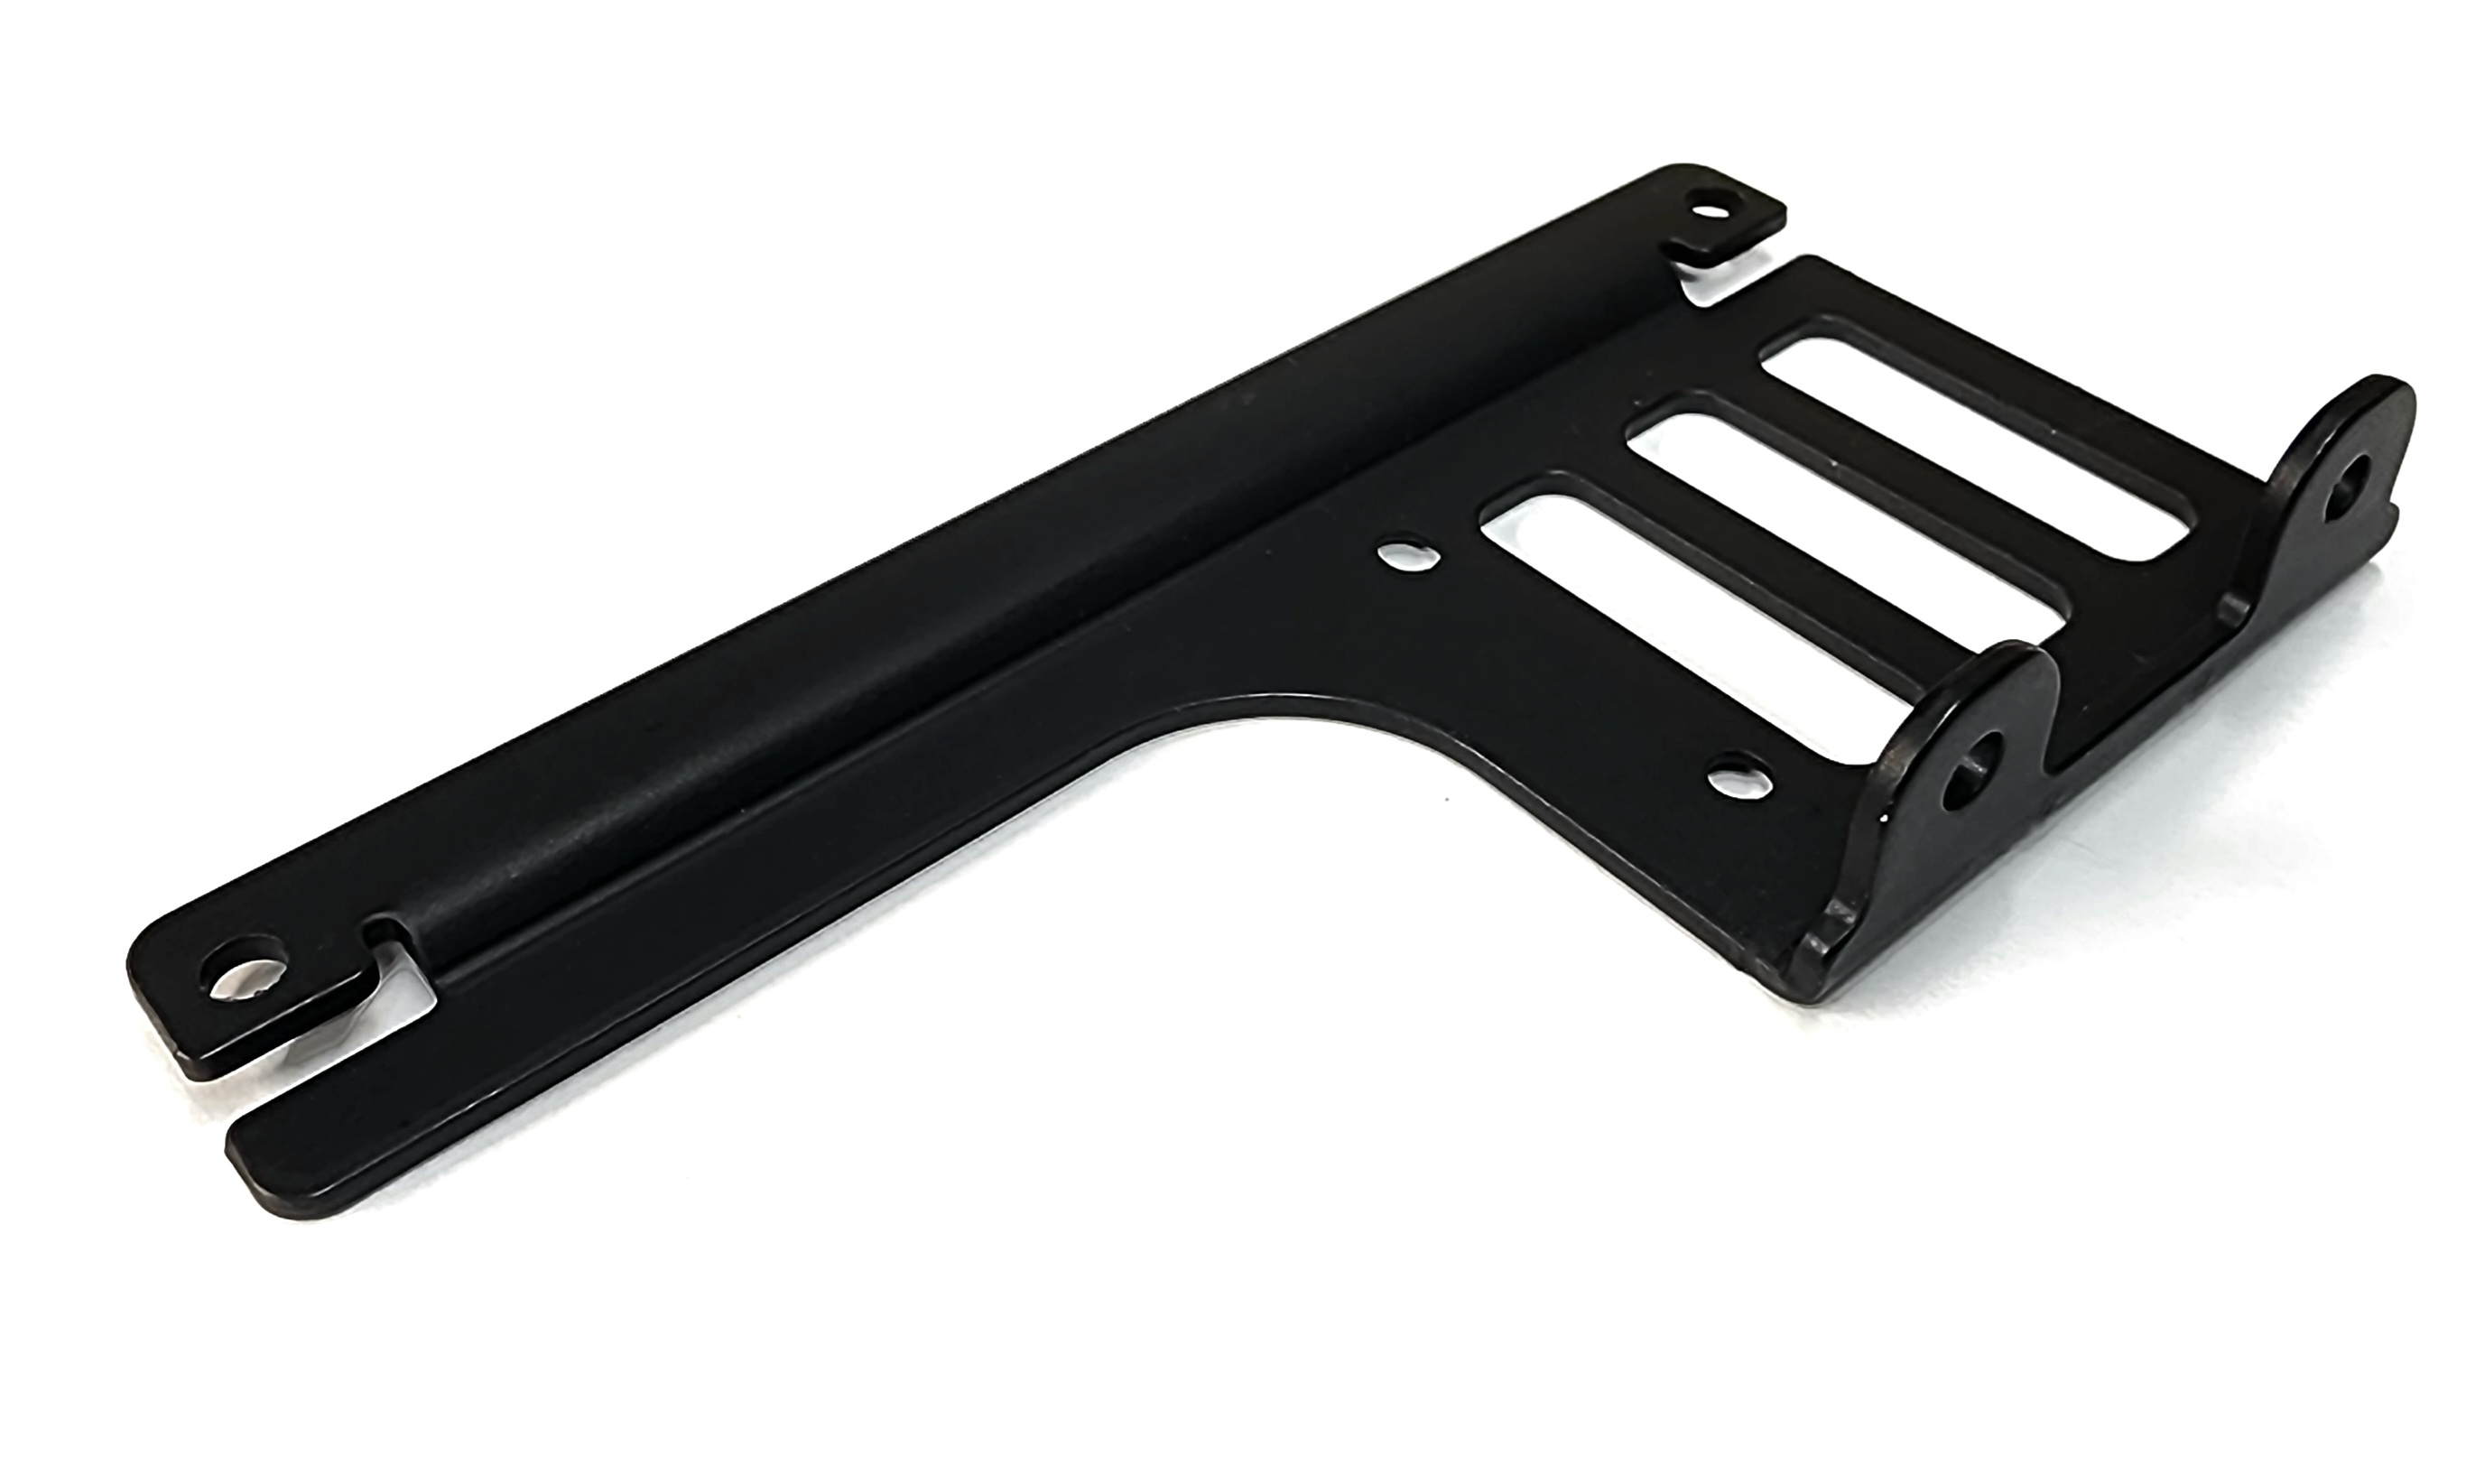 Have one to sell? Sell now Straight Extender Rear Bracket for Nvidia A10 L40S H100 GPU 682-00007-5555-001